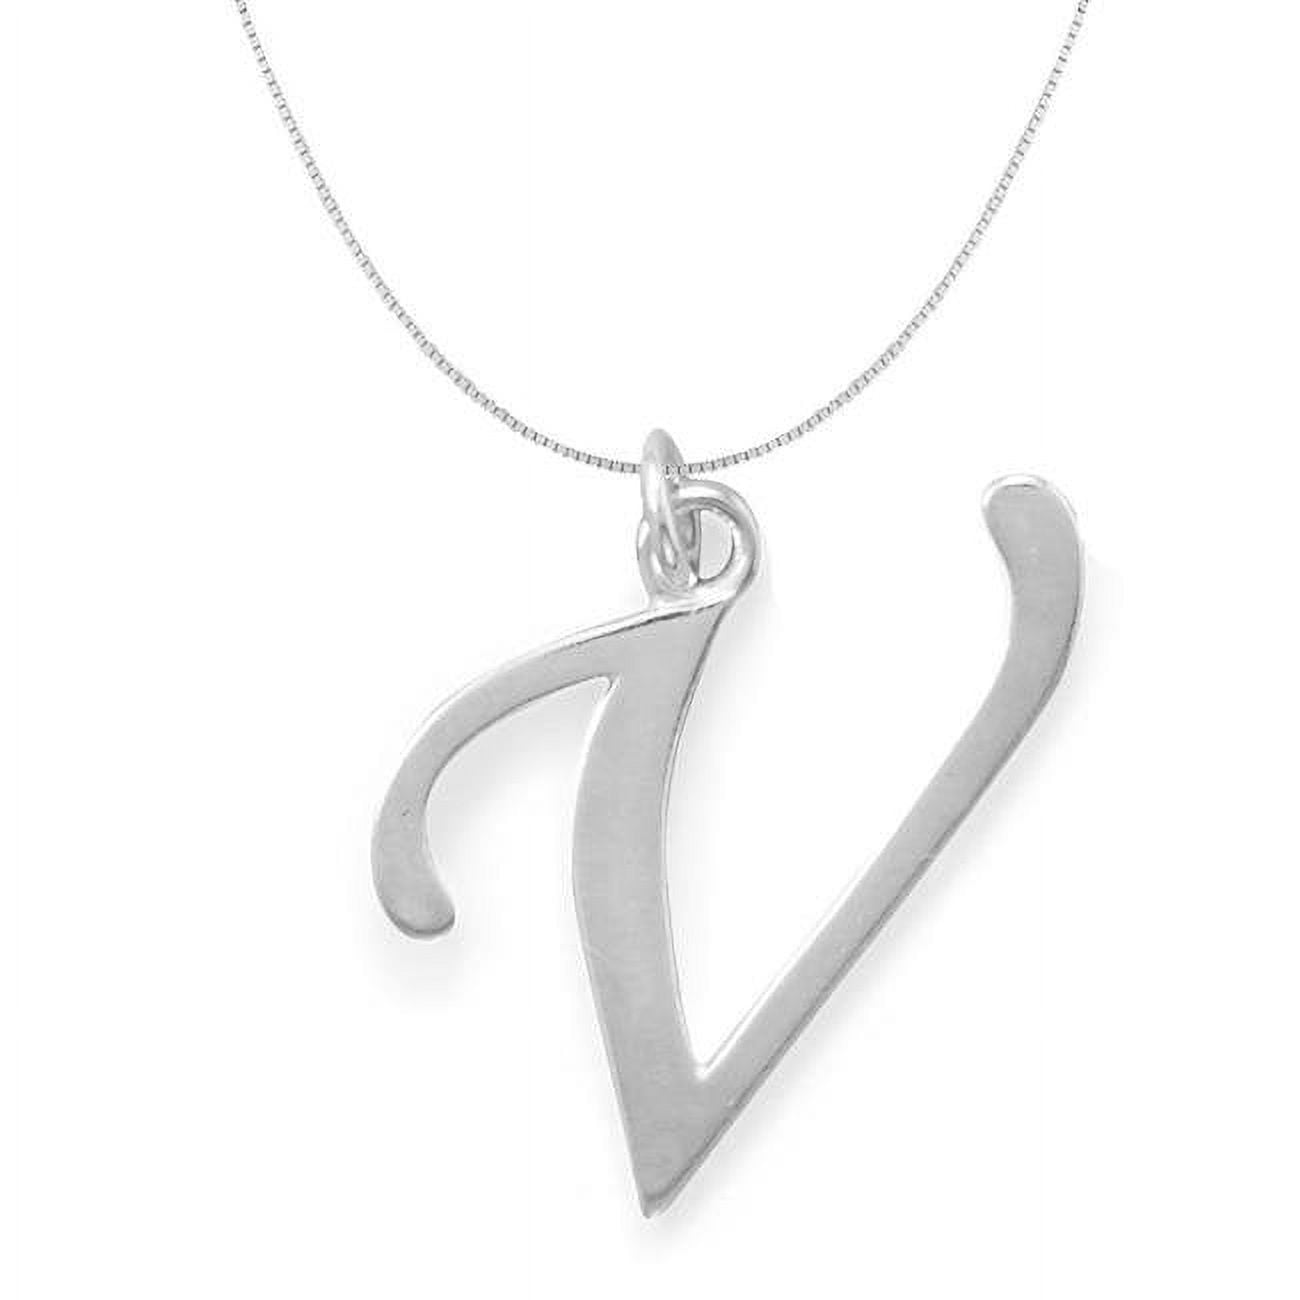 Initial V Sterling Silver Pendant Necklace Silver Initial V 